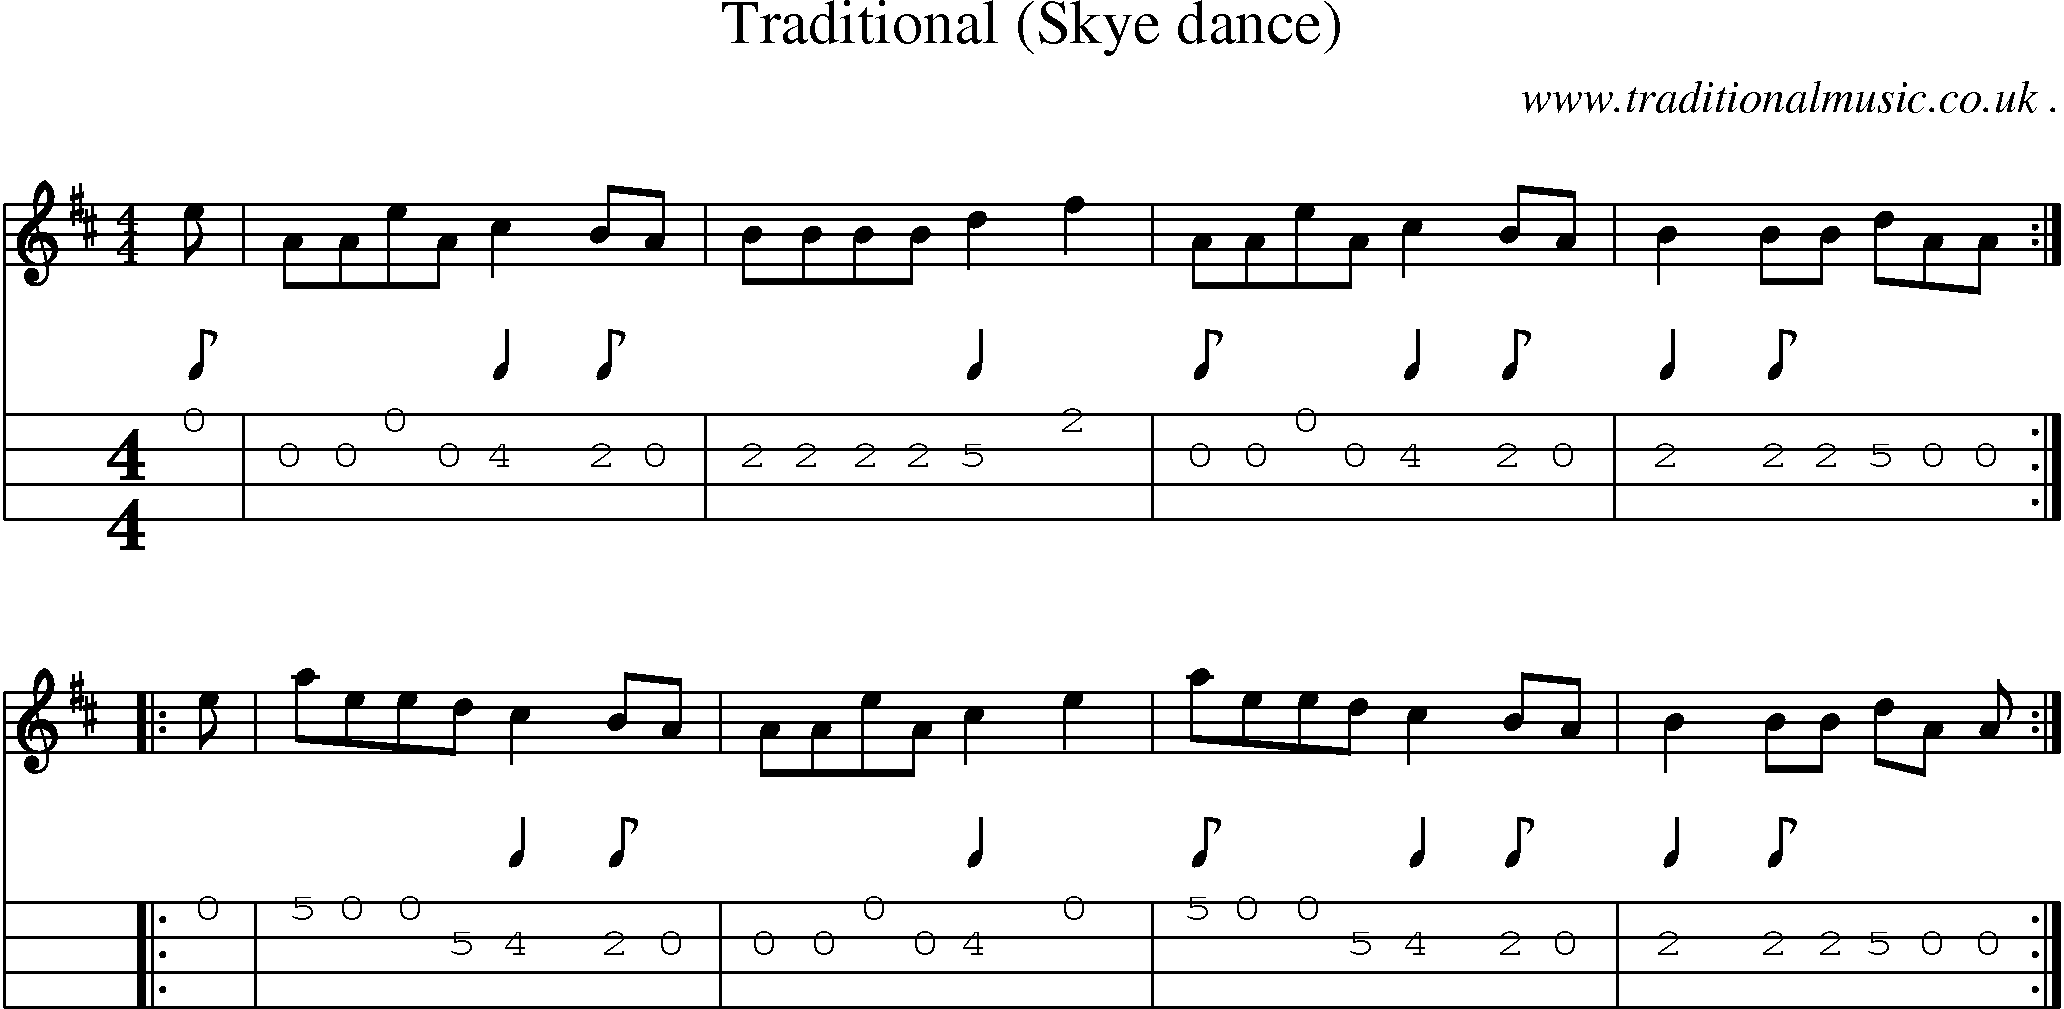 Sheet-music  score, Chords and Mandolin Tabs for Traditional Skye Dance